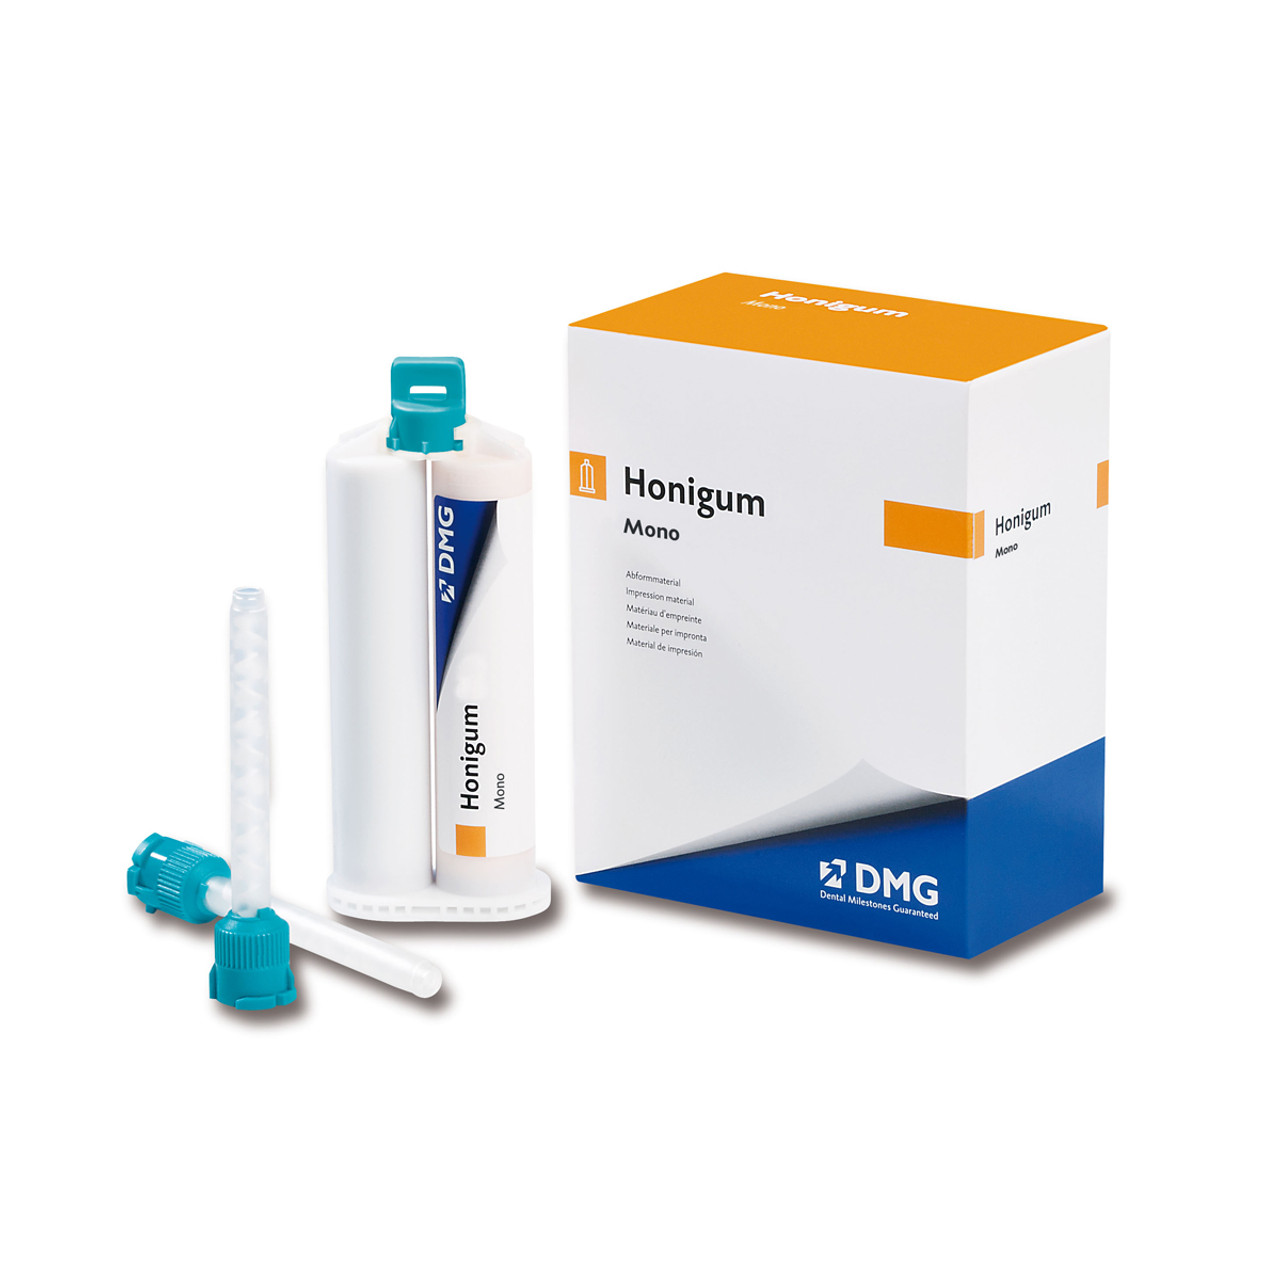 DMG America - Honigum Automix Mono 4-50ml Cartridges, 12 Automix and Intra-Oral Tips